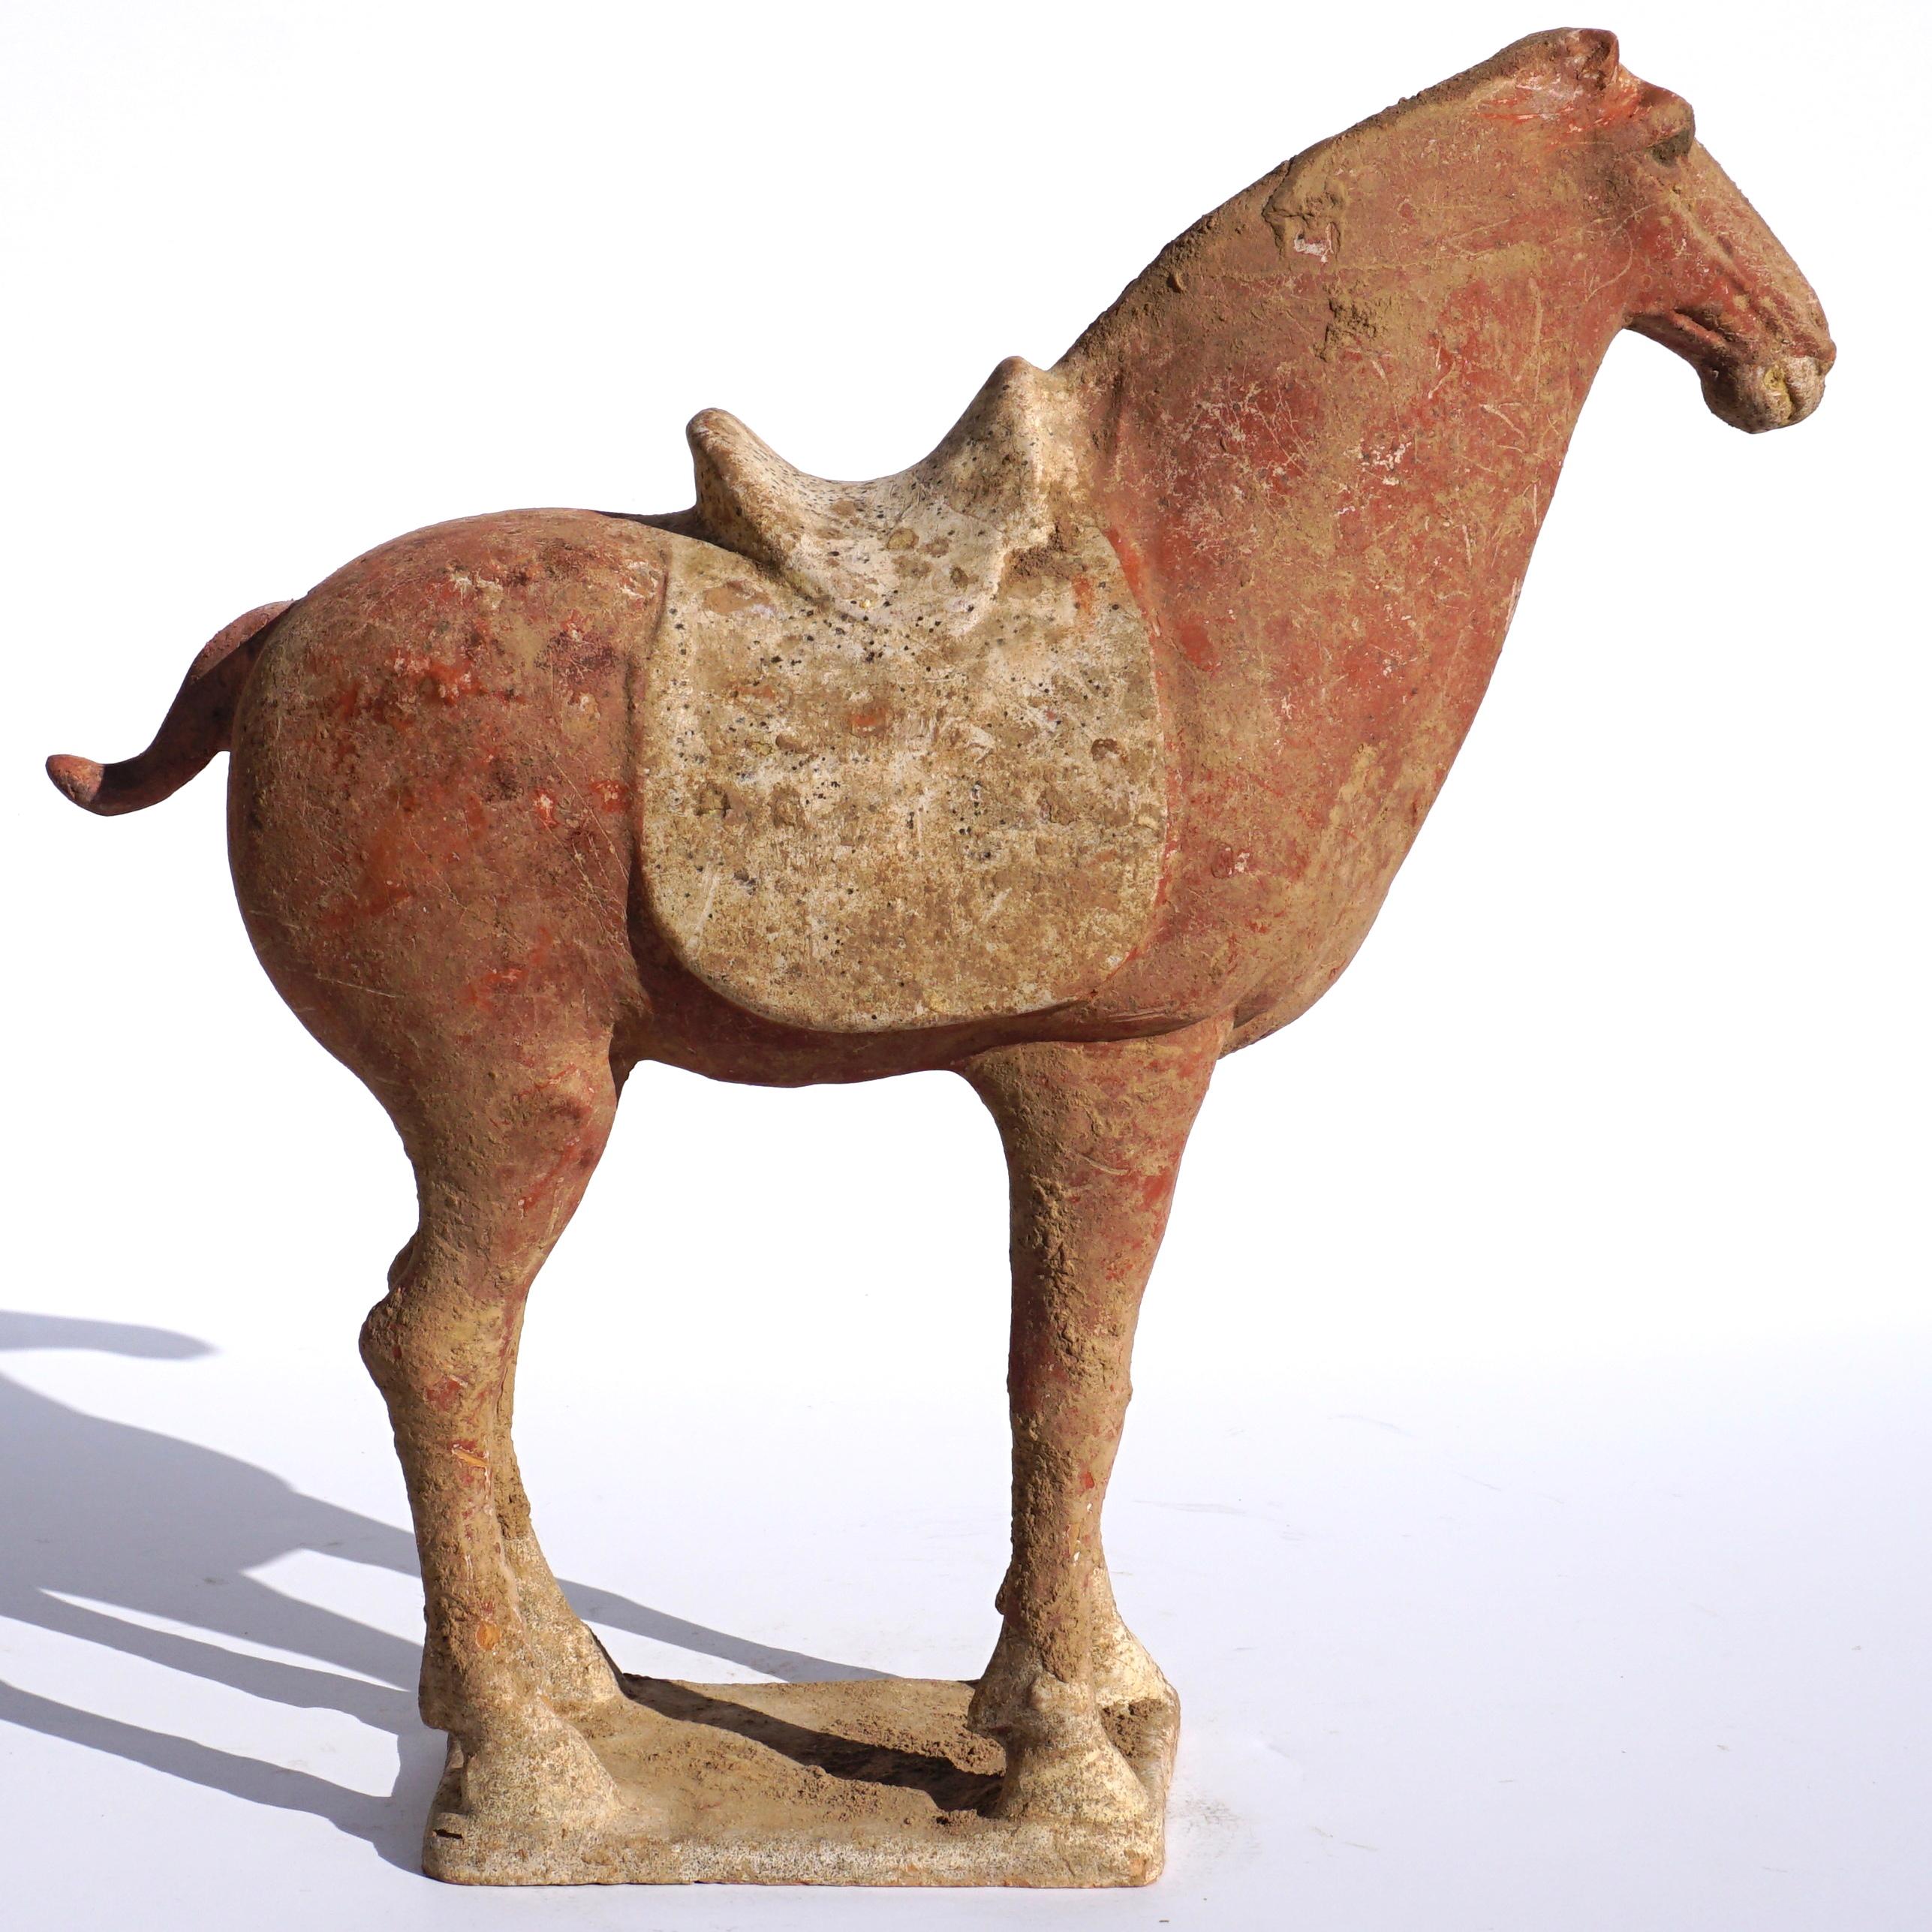 A powerfully proportioned Mingqi tomb pottery horse with traces of red polychrome colors. Absolutely wonderful energy with original red polychrome paint which alludes to famous triumphant battles where horses were painted red in symbolic gestures.